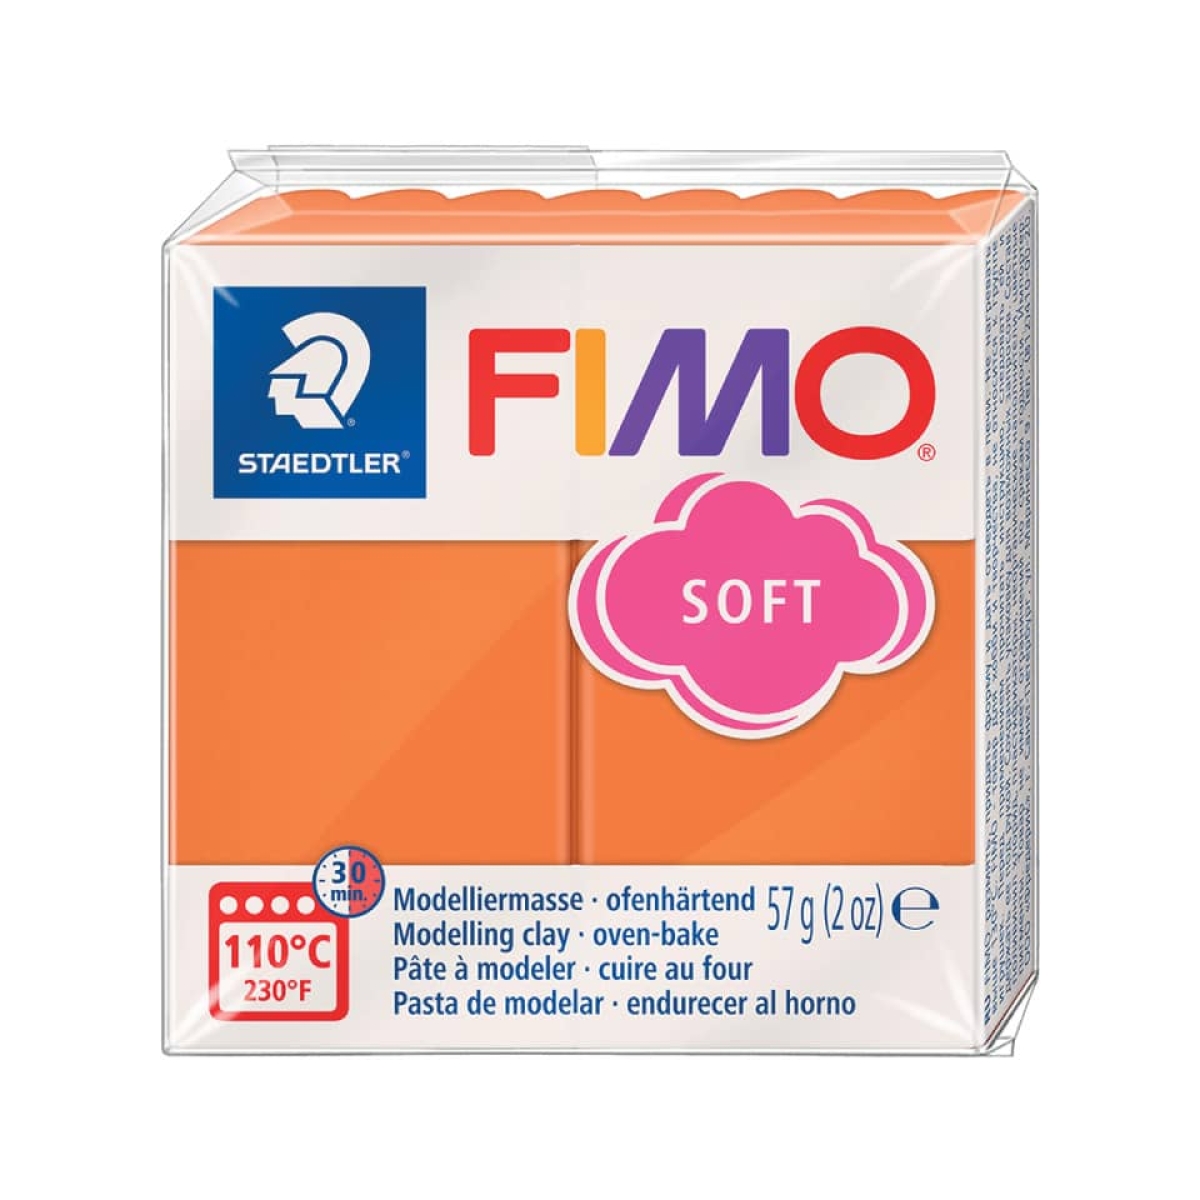 STAEDTLERModeling clay FIMO® soft, 57 g, cognac 8020-76-Price for 0.0570 kgArticle-No: 4006608809850